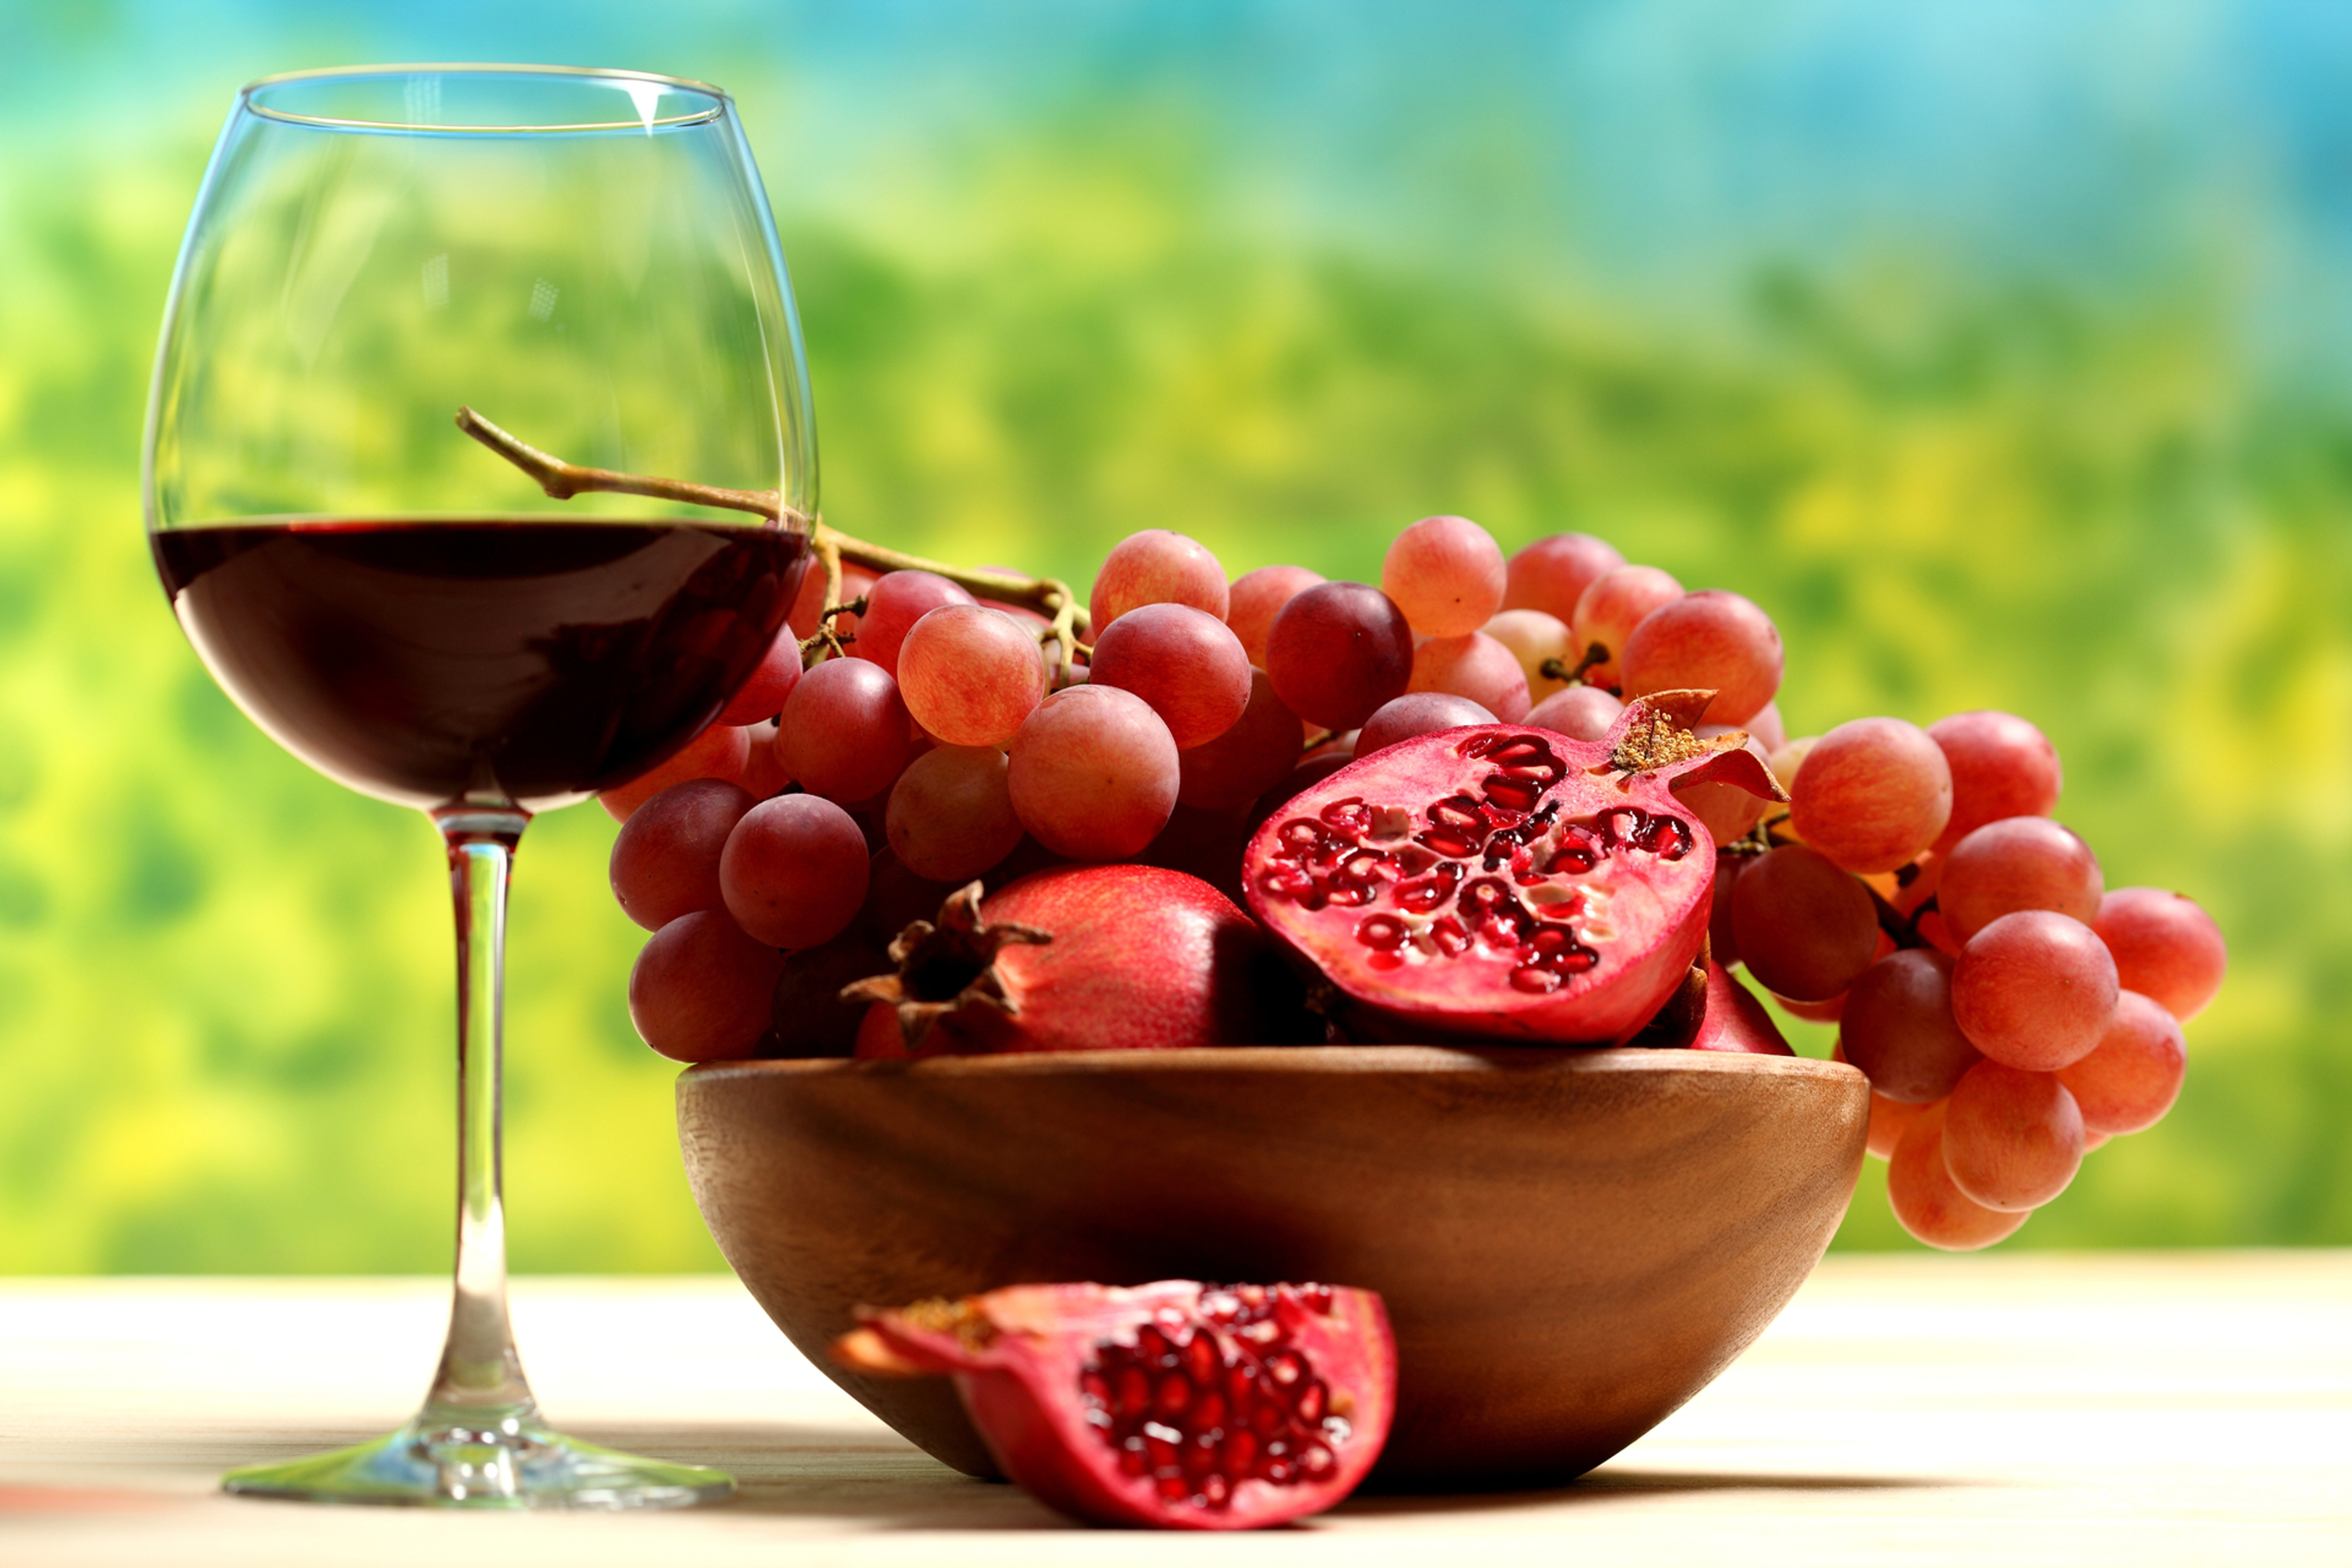 Wine from grapes and pomegranate